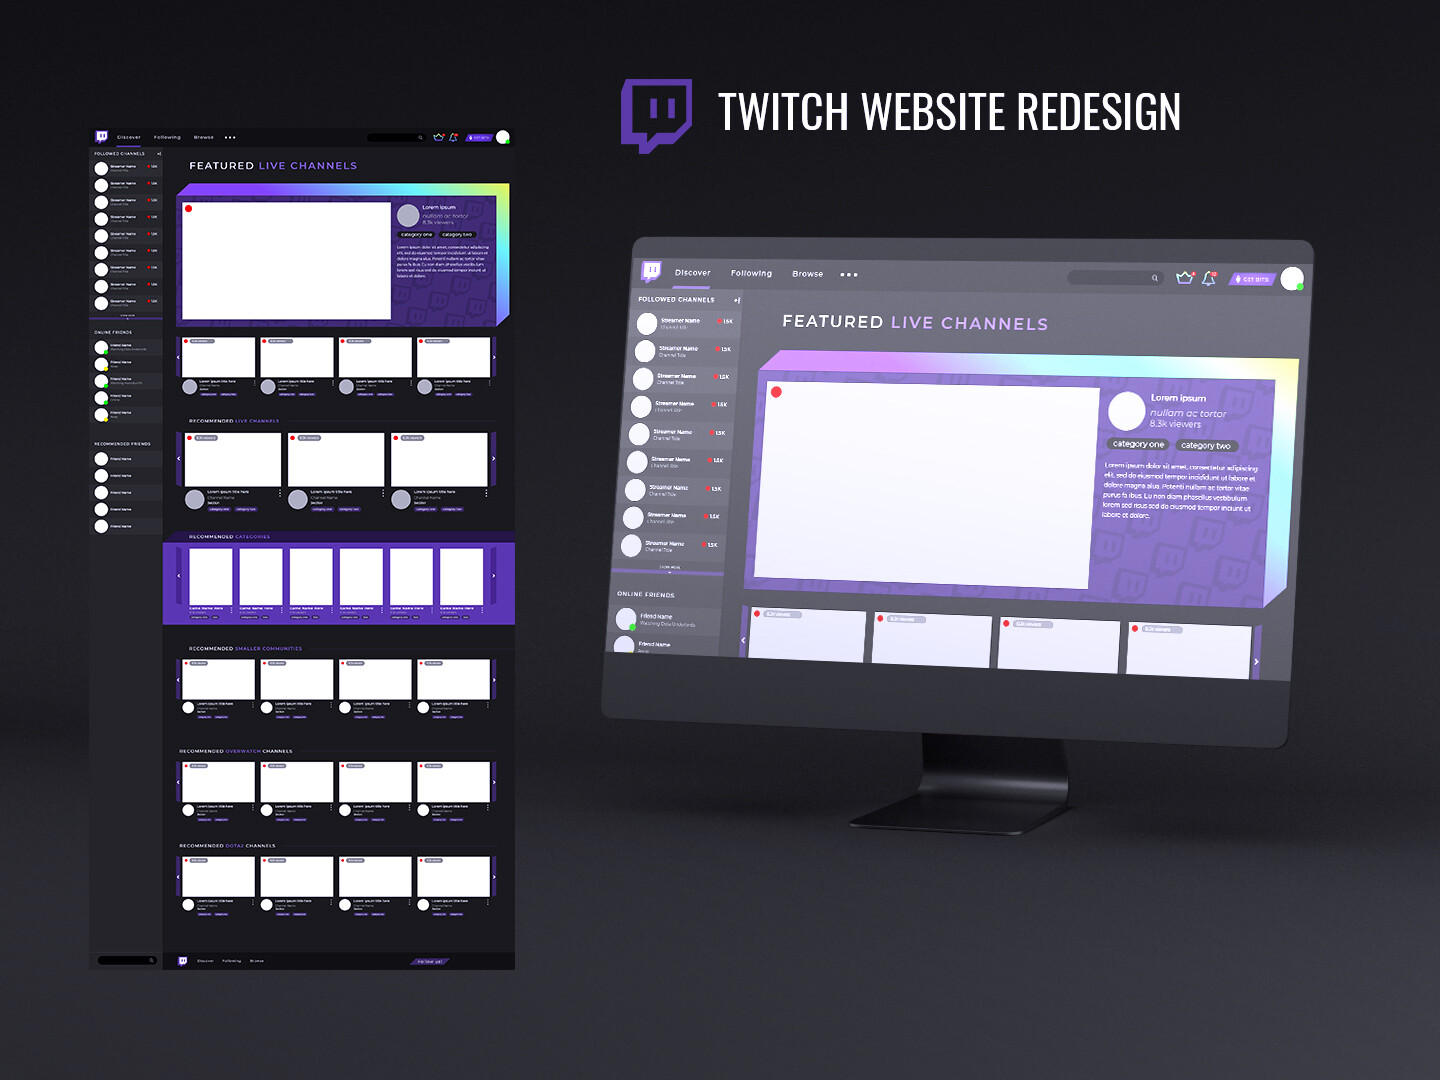 Mockup showing Twitch website with the assets